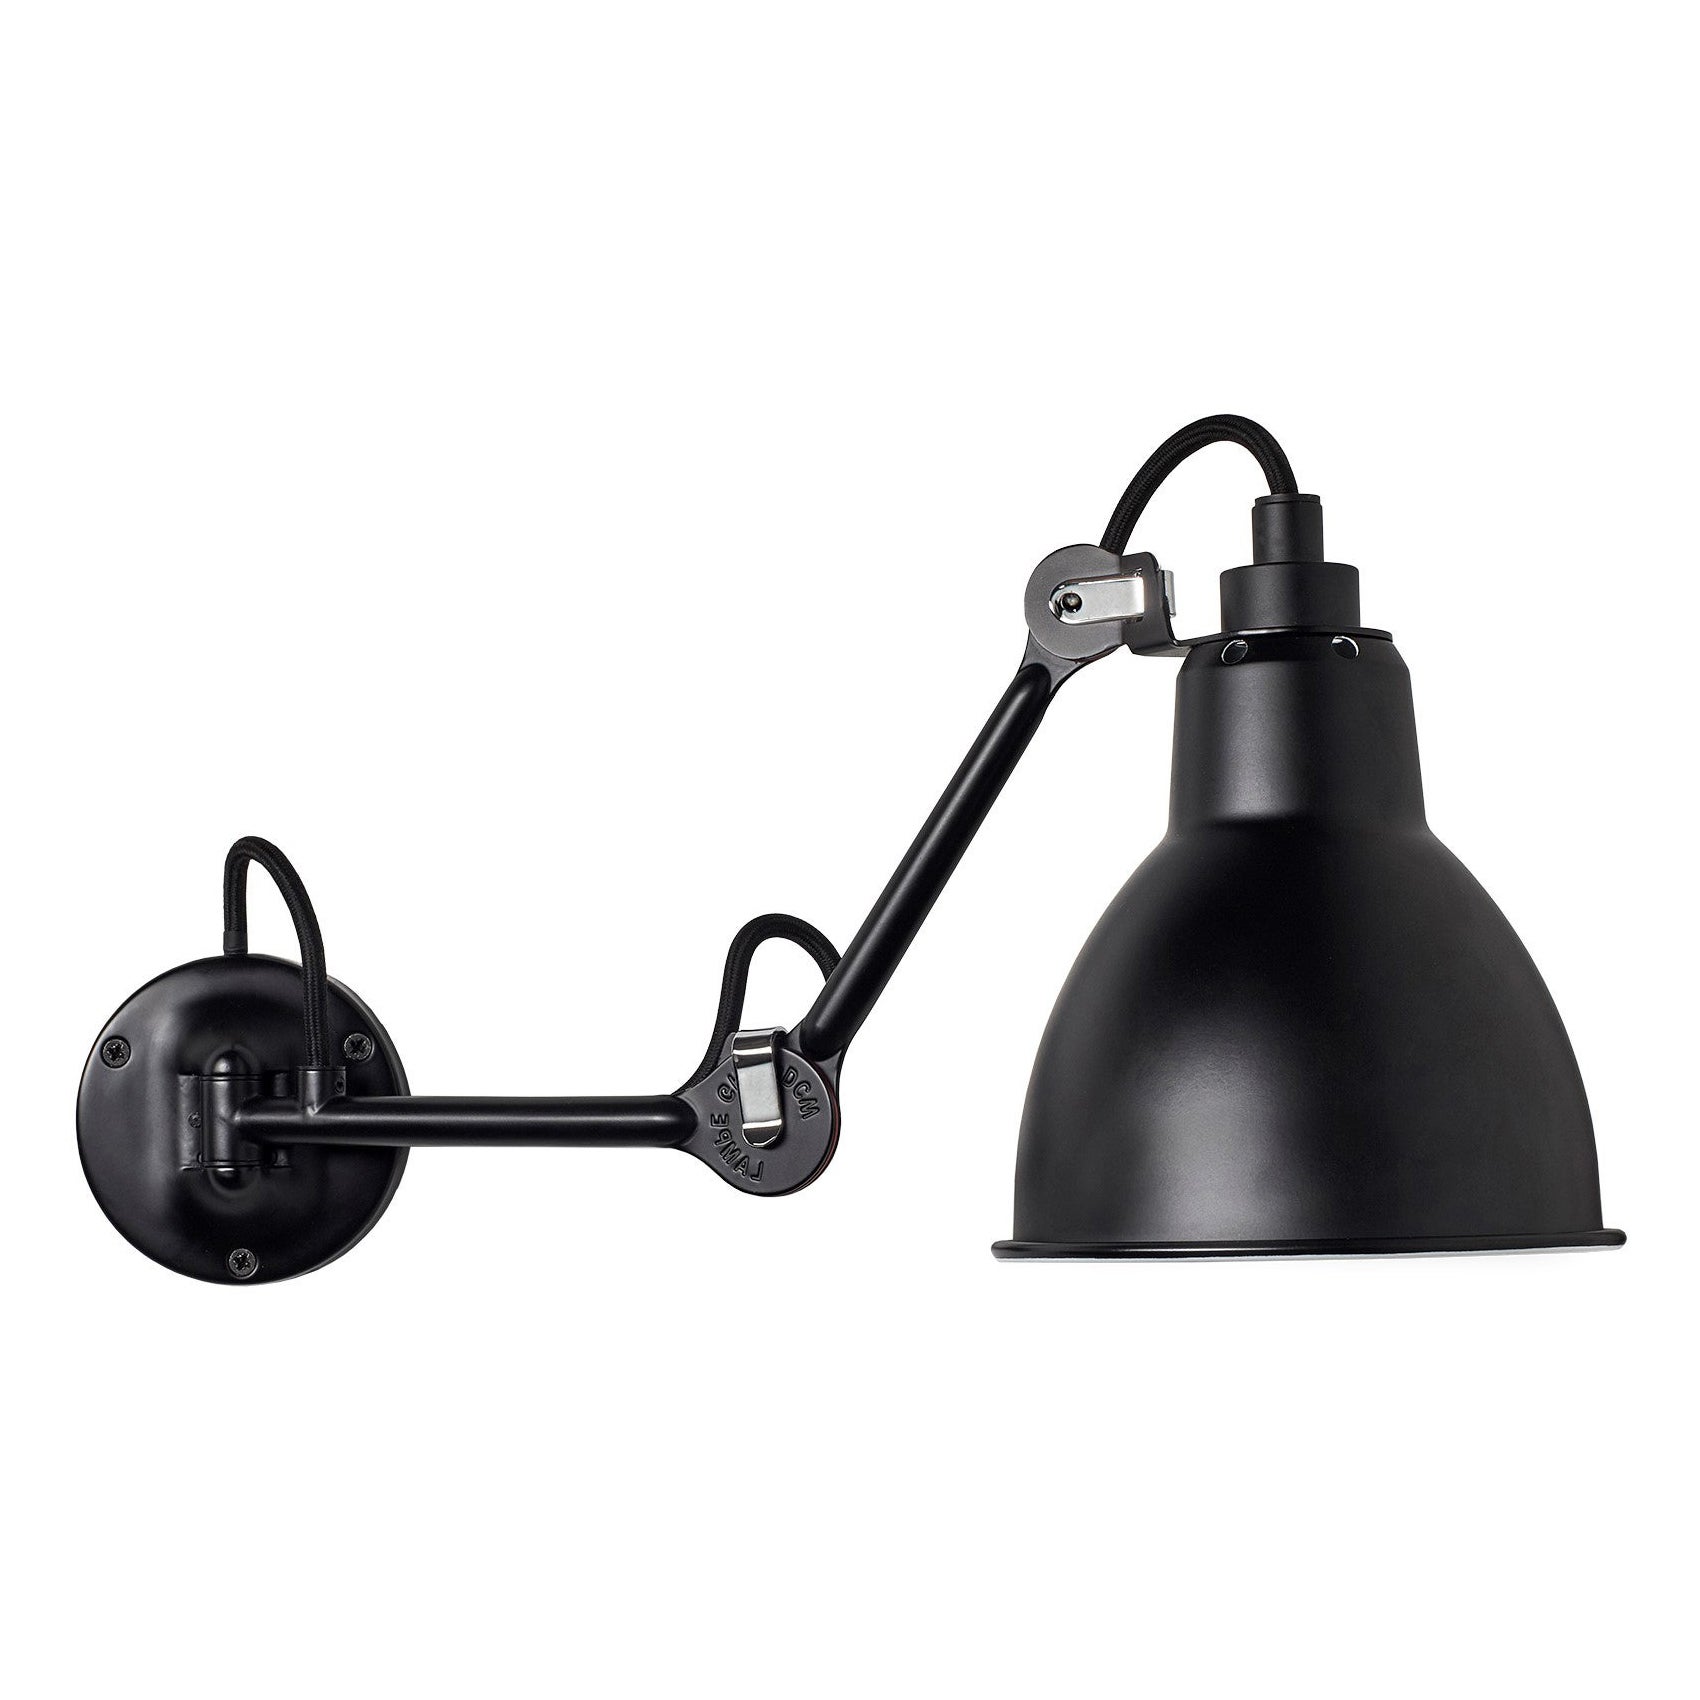 DCW Editions La Lampe Gras N°204 Wall Lamp in Black Steel Arm and Black Shade